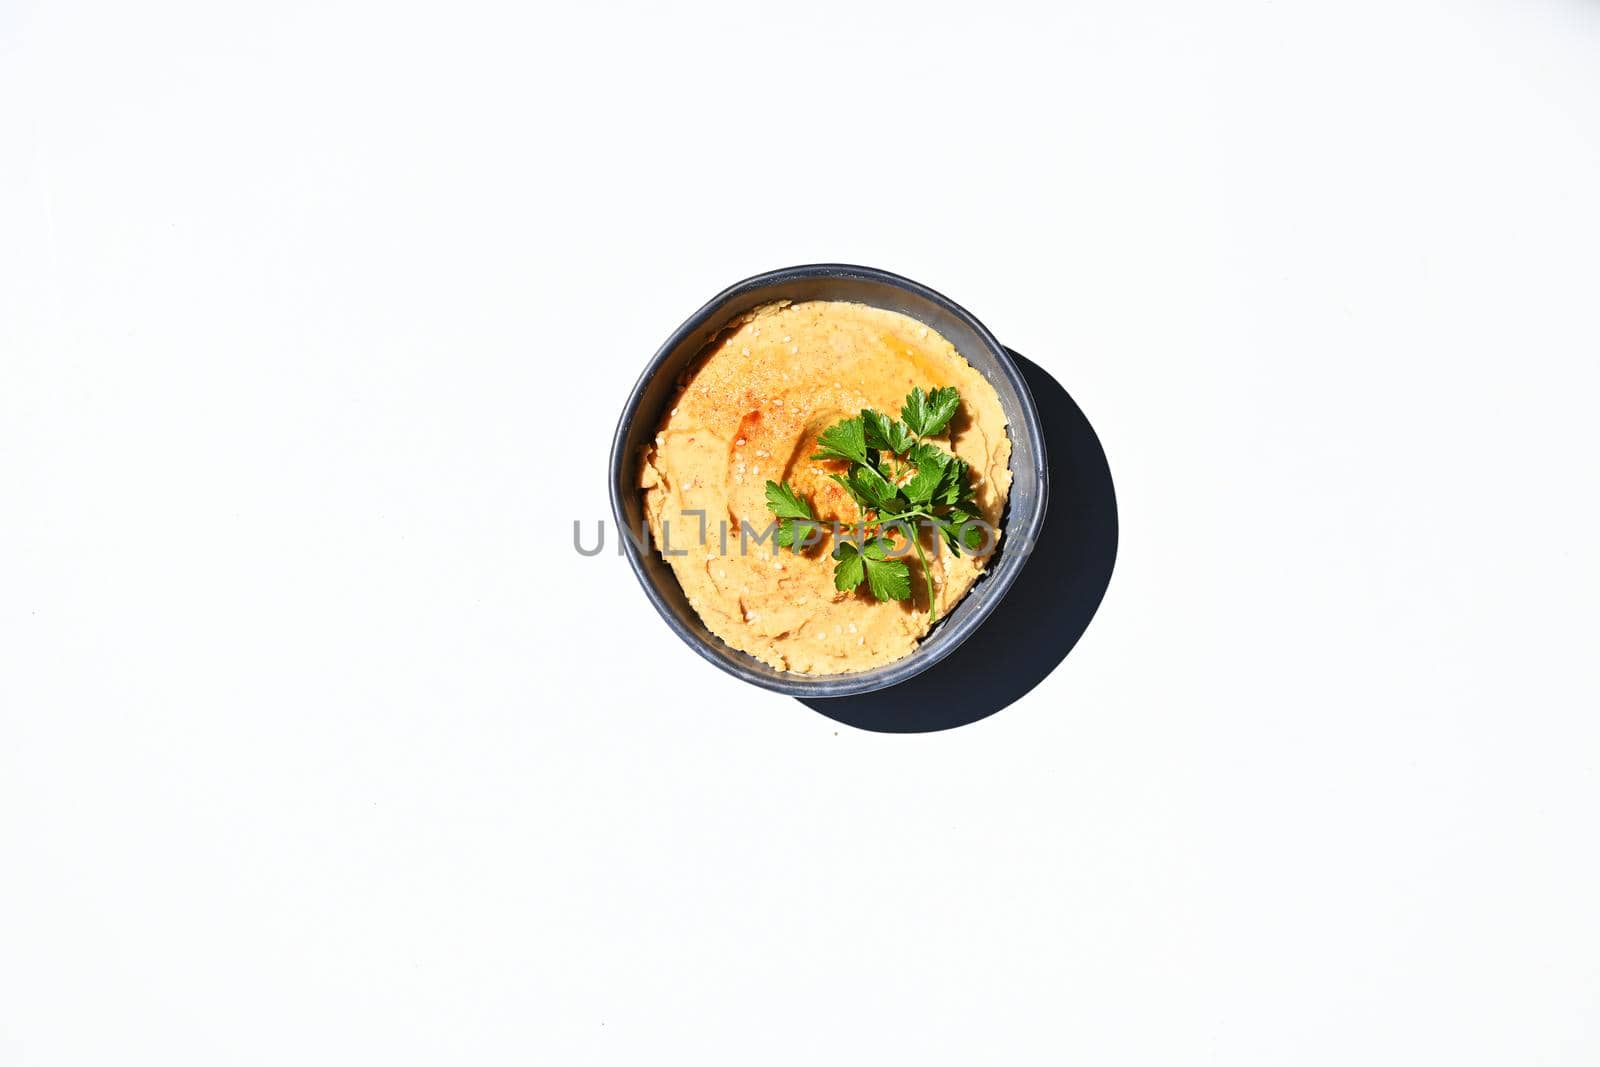 Still life. Flat lay of a bowl of hummus with olive oil and parsley, isolated over white background with copy ad space by artgf